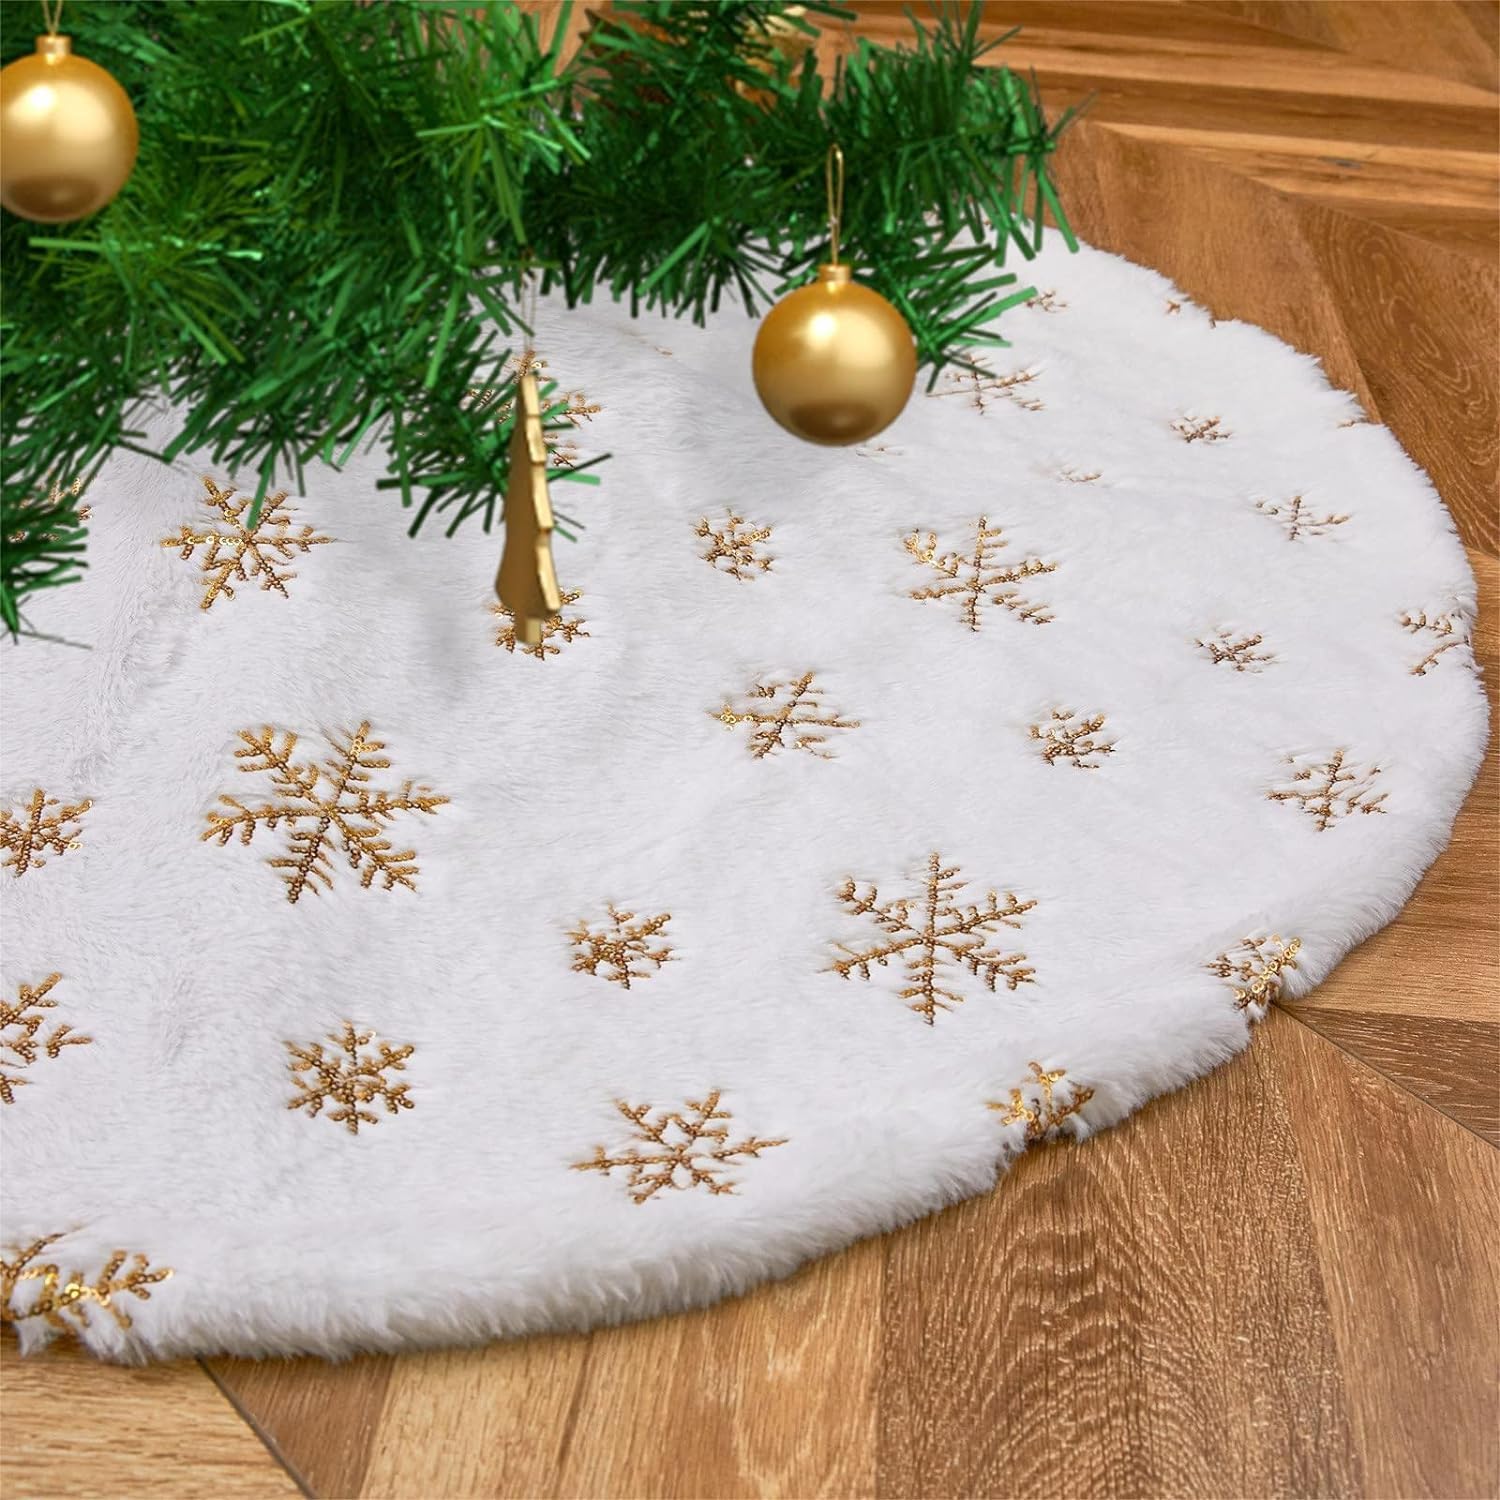 Pretocter Christmas Tree Skirt for Christmas Decoration Luxury Faux Fur Christmas Tree Mat Sequin Snowflake Christmas Tree Base Cover Xmas Tree Ornaments for Xmas Party Holiday Decorations 90CM-Gold